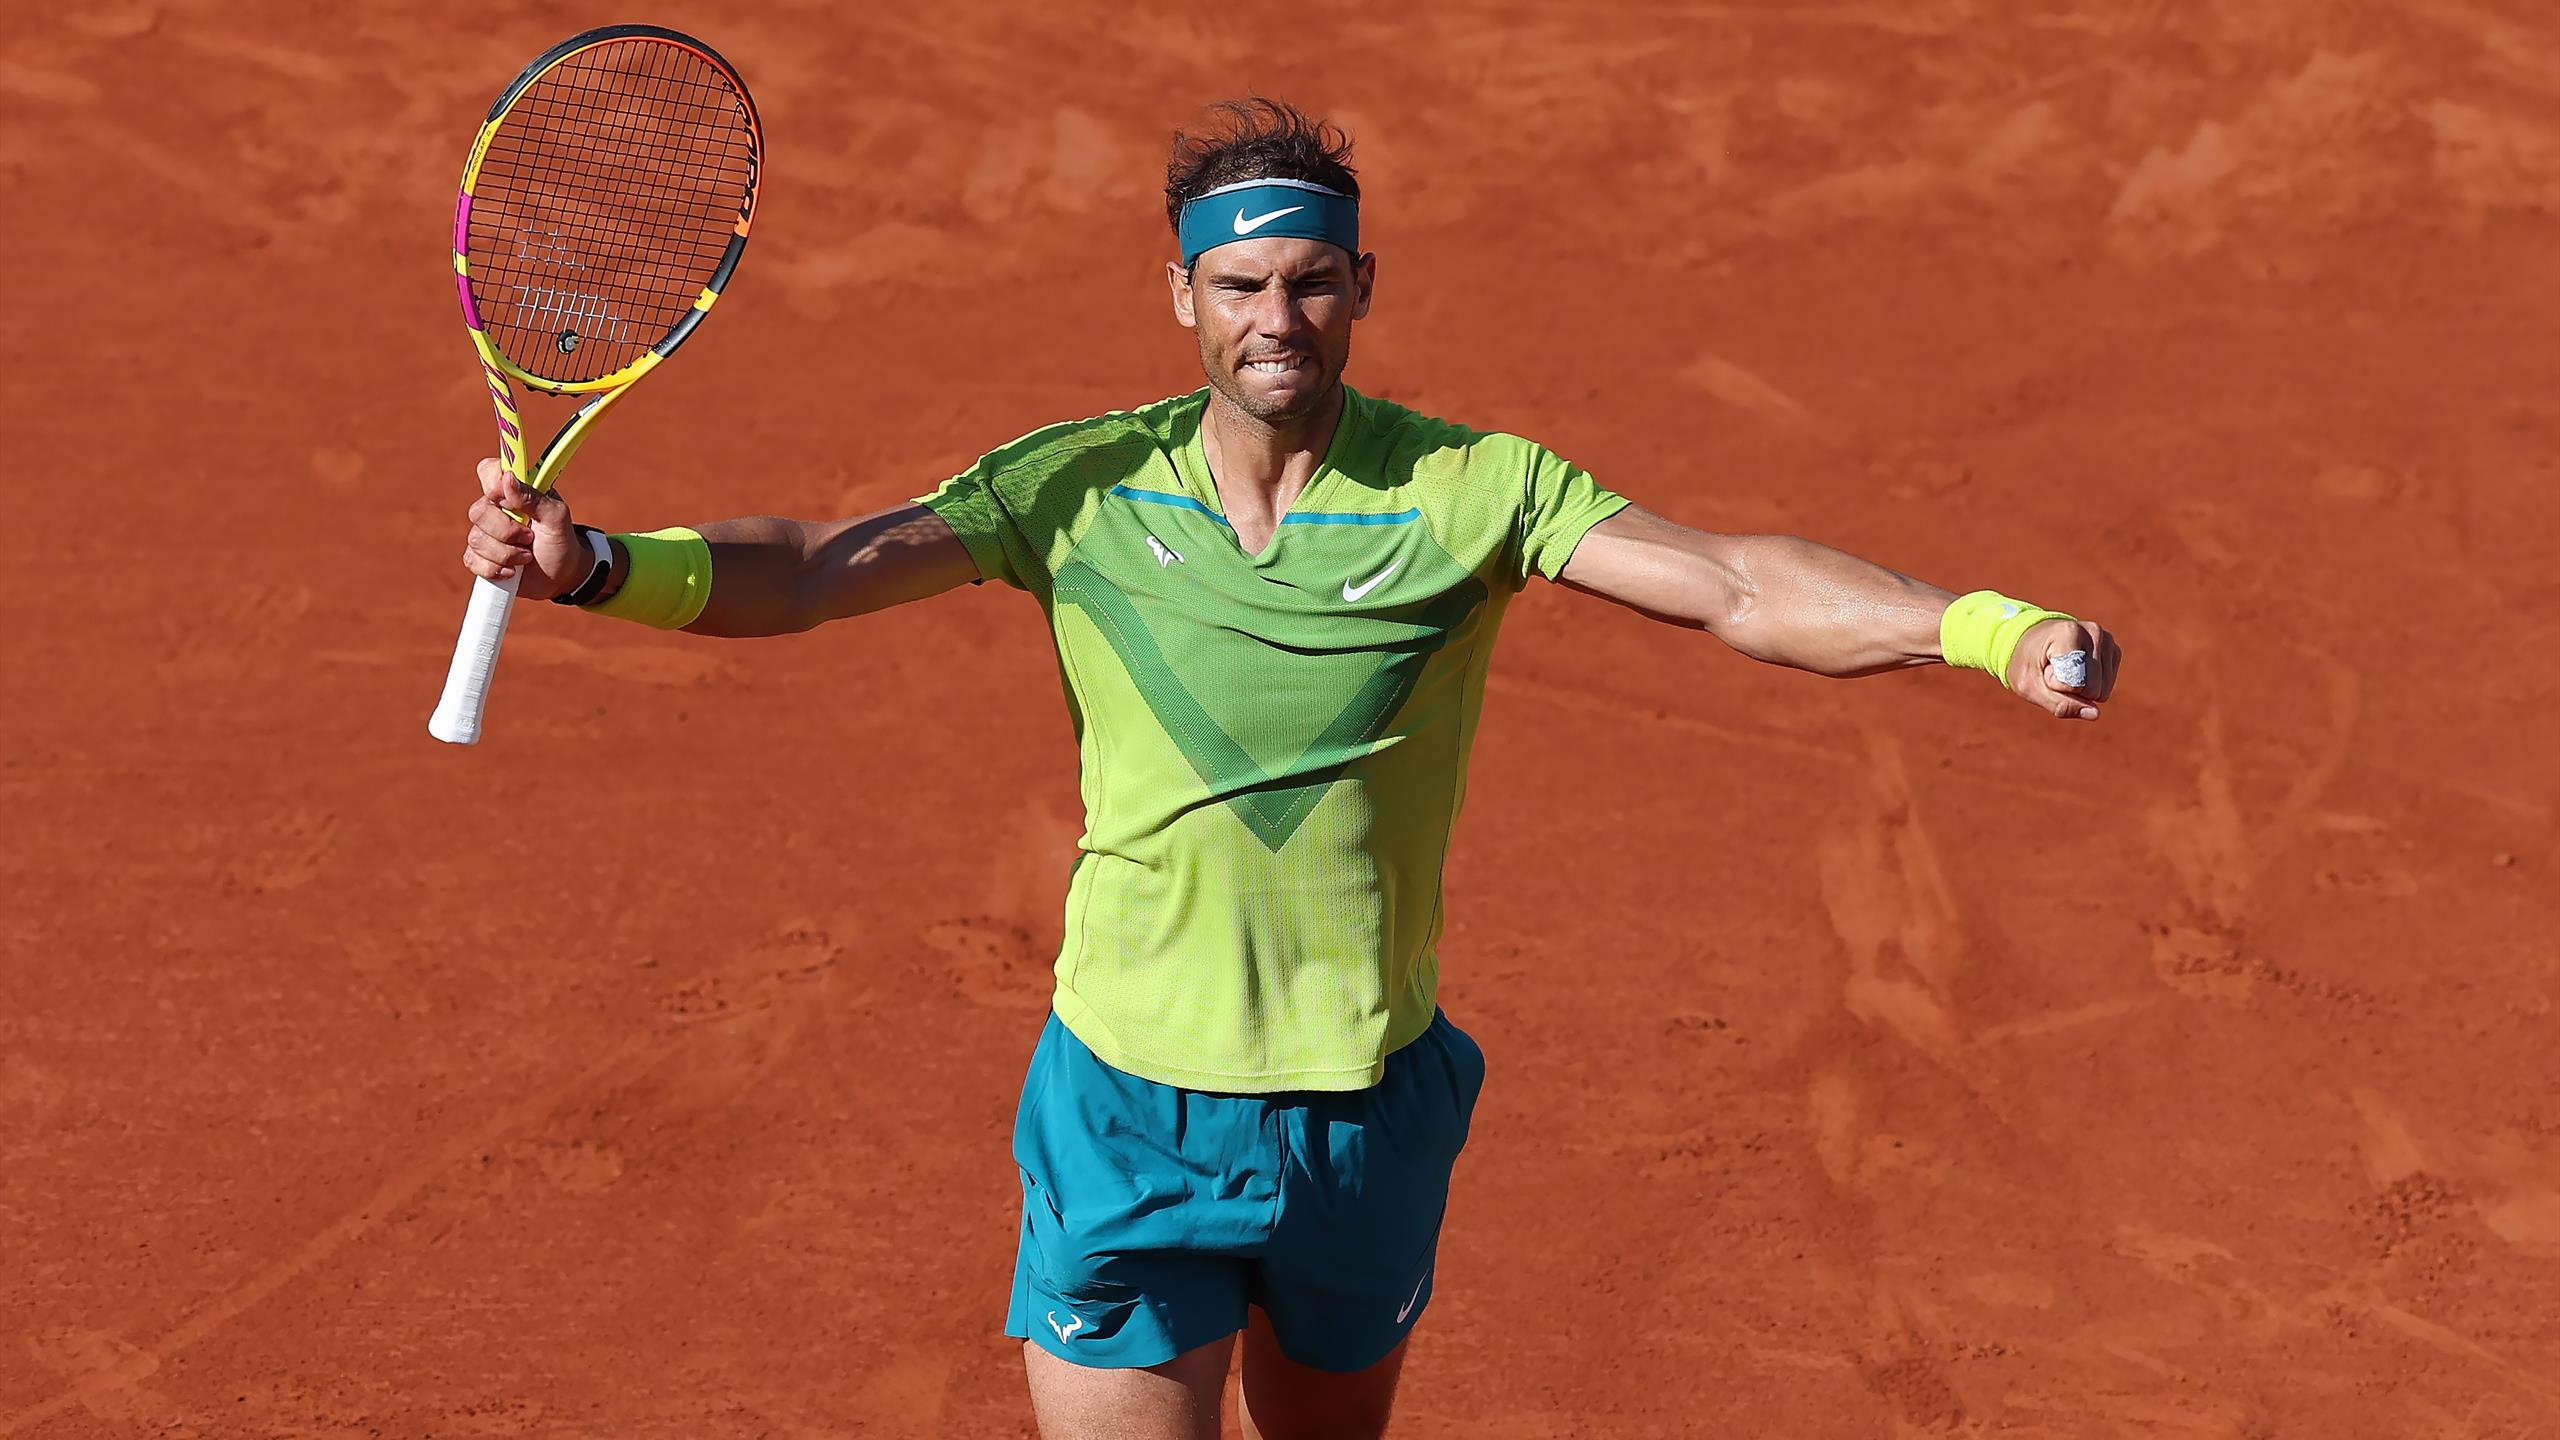 French Open 2022 I think it was my best match   Rafael Nadal 2560x1440